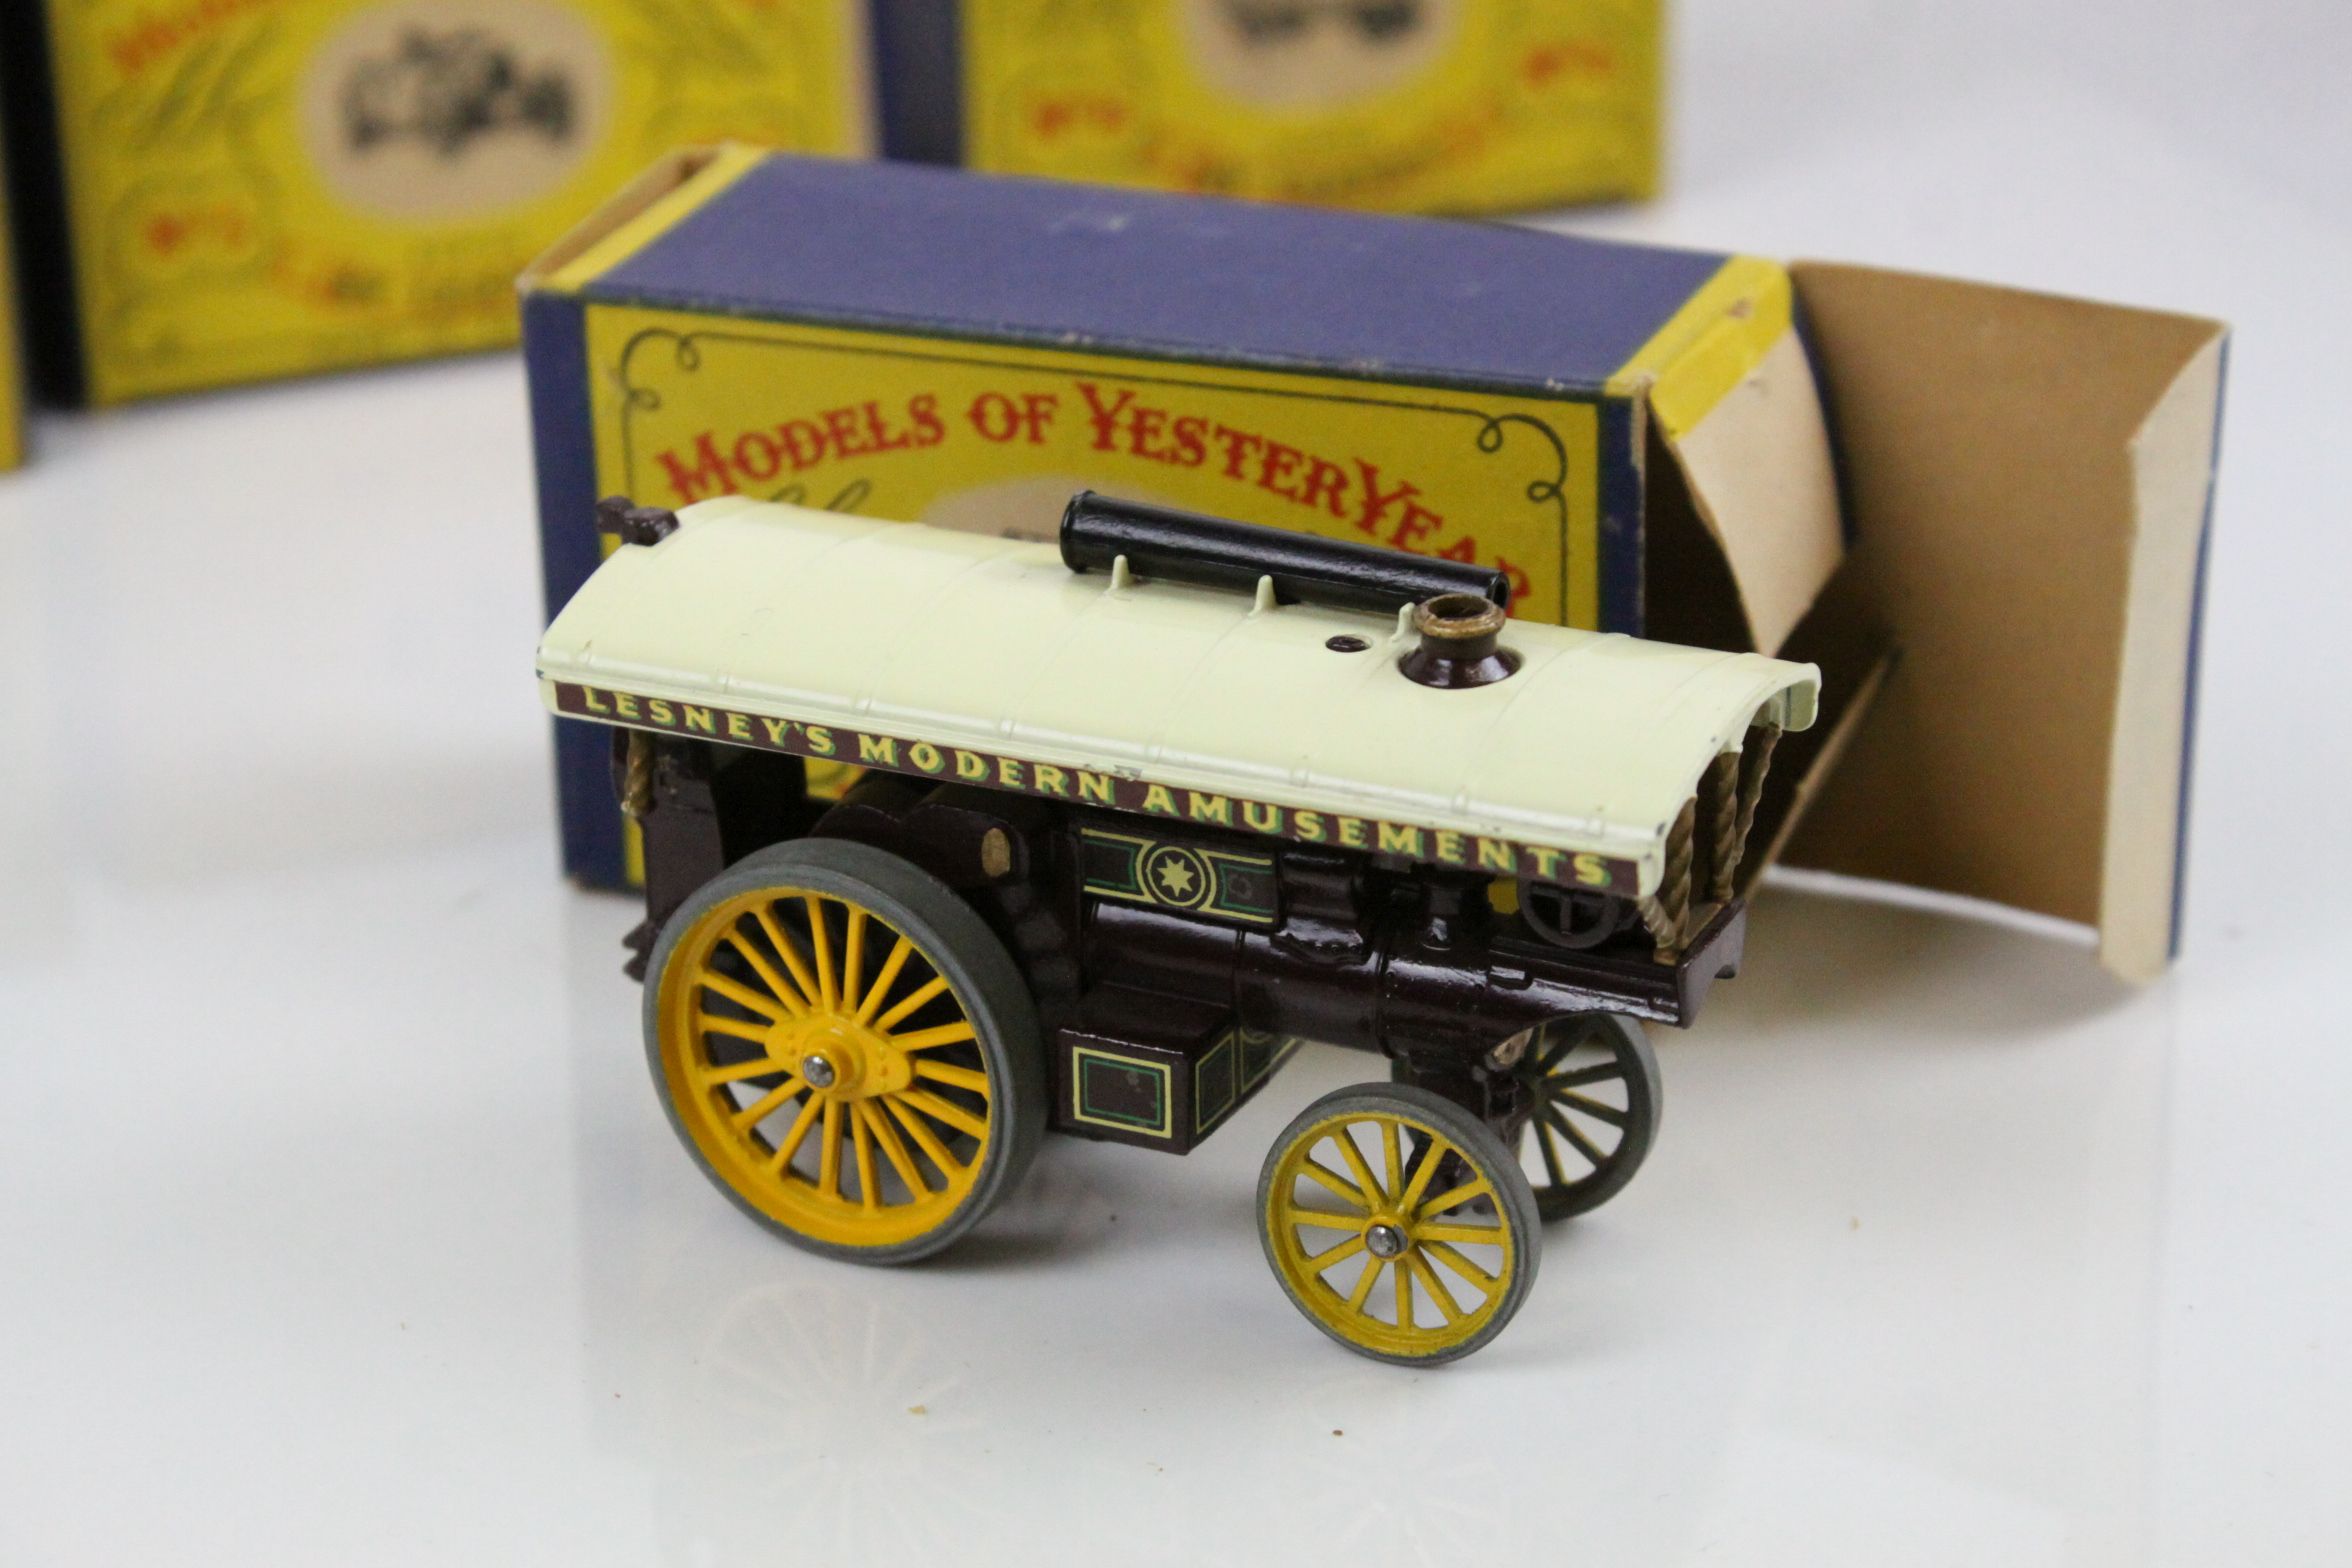 18 boxed diecast Matchbox Models Of YesterYear to include no.1 Allchin Traction Engine, no.2 B - Image 14 of 19